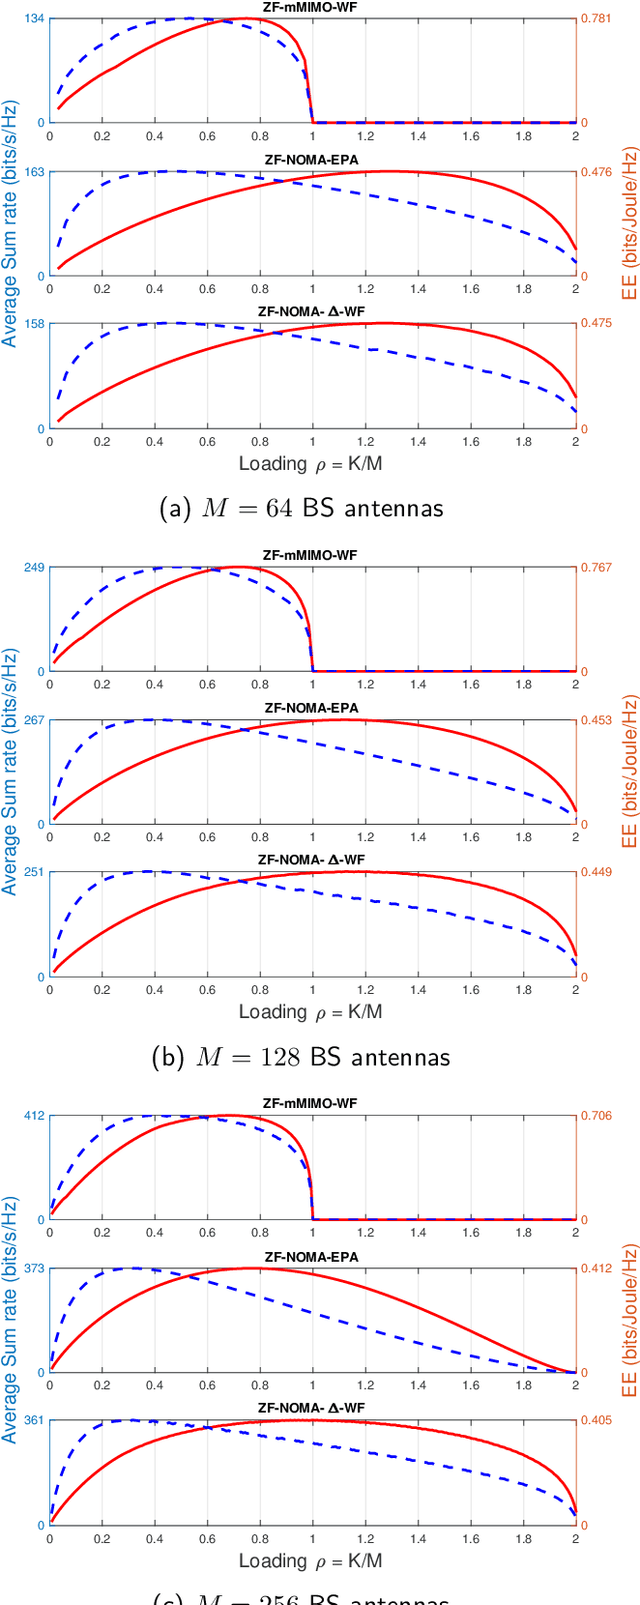 Figure 2 for Massive MIMO and NOMA Bits-per-Antenna Efficiency under Power Allocation Policies